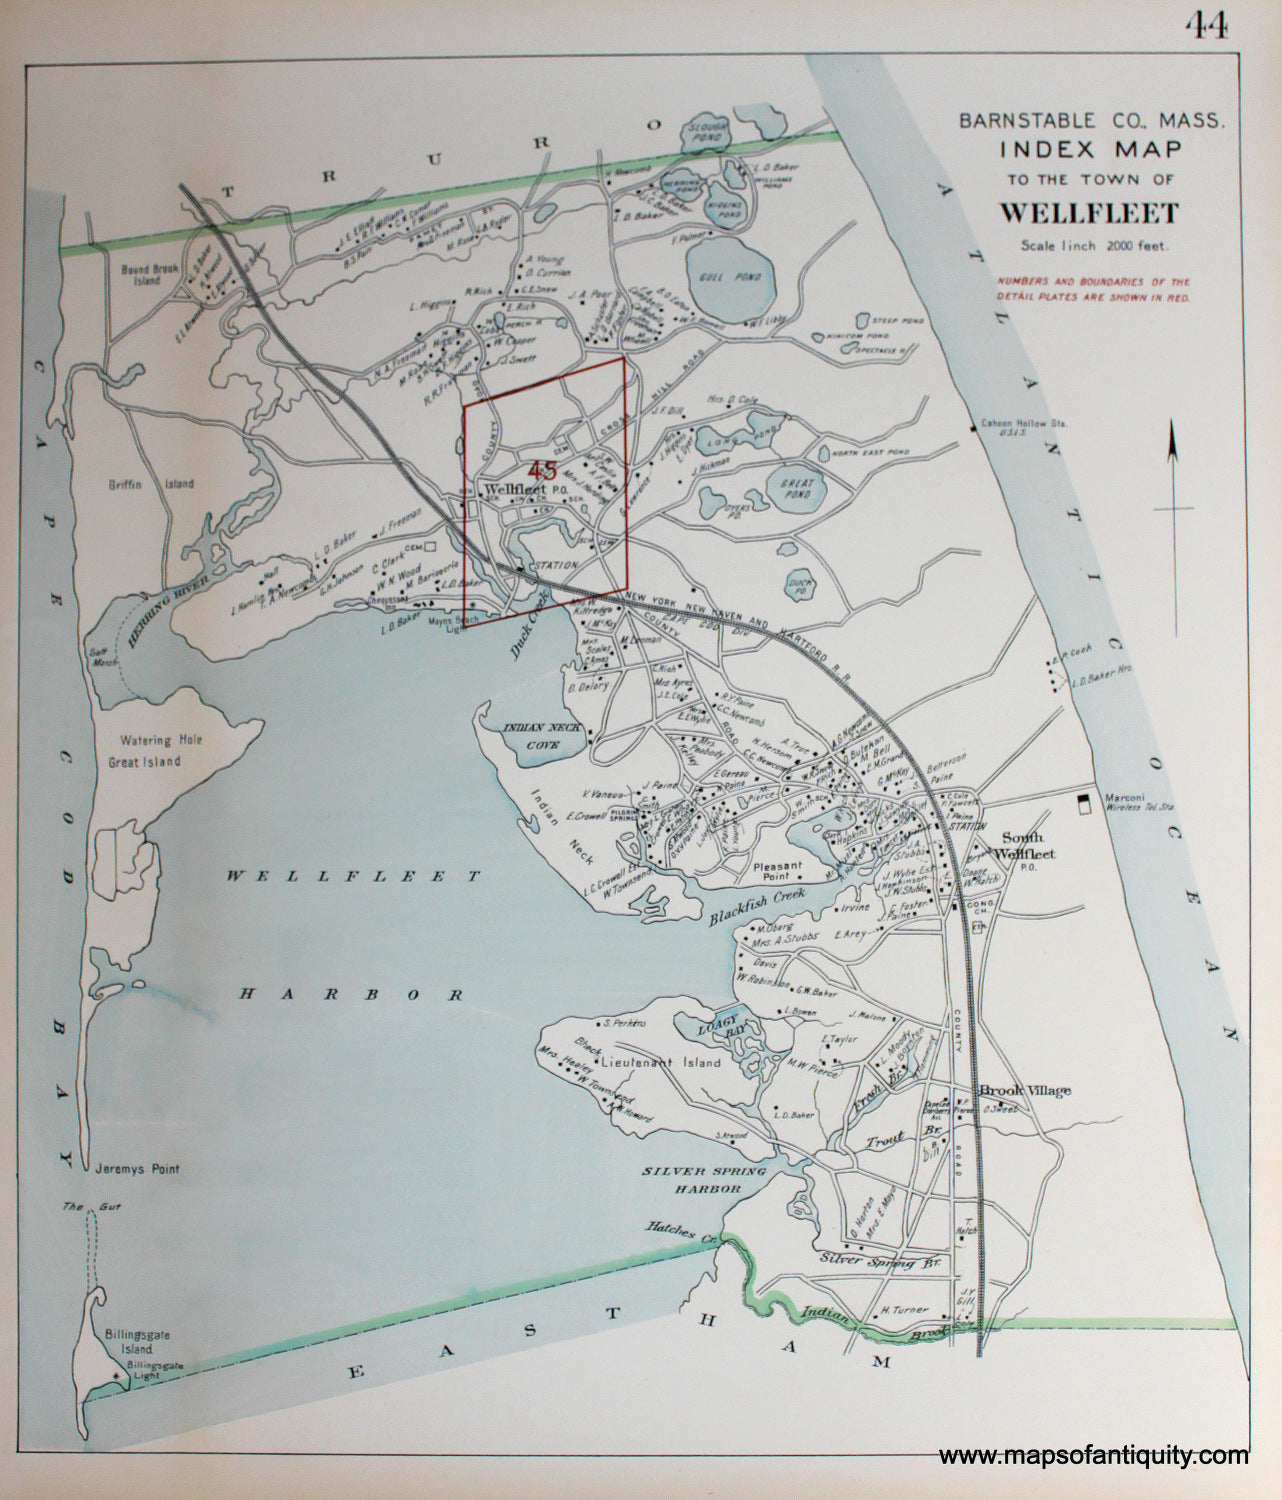 Index-Map-to-the-Town-of-Wellfleet